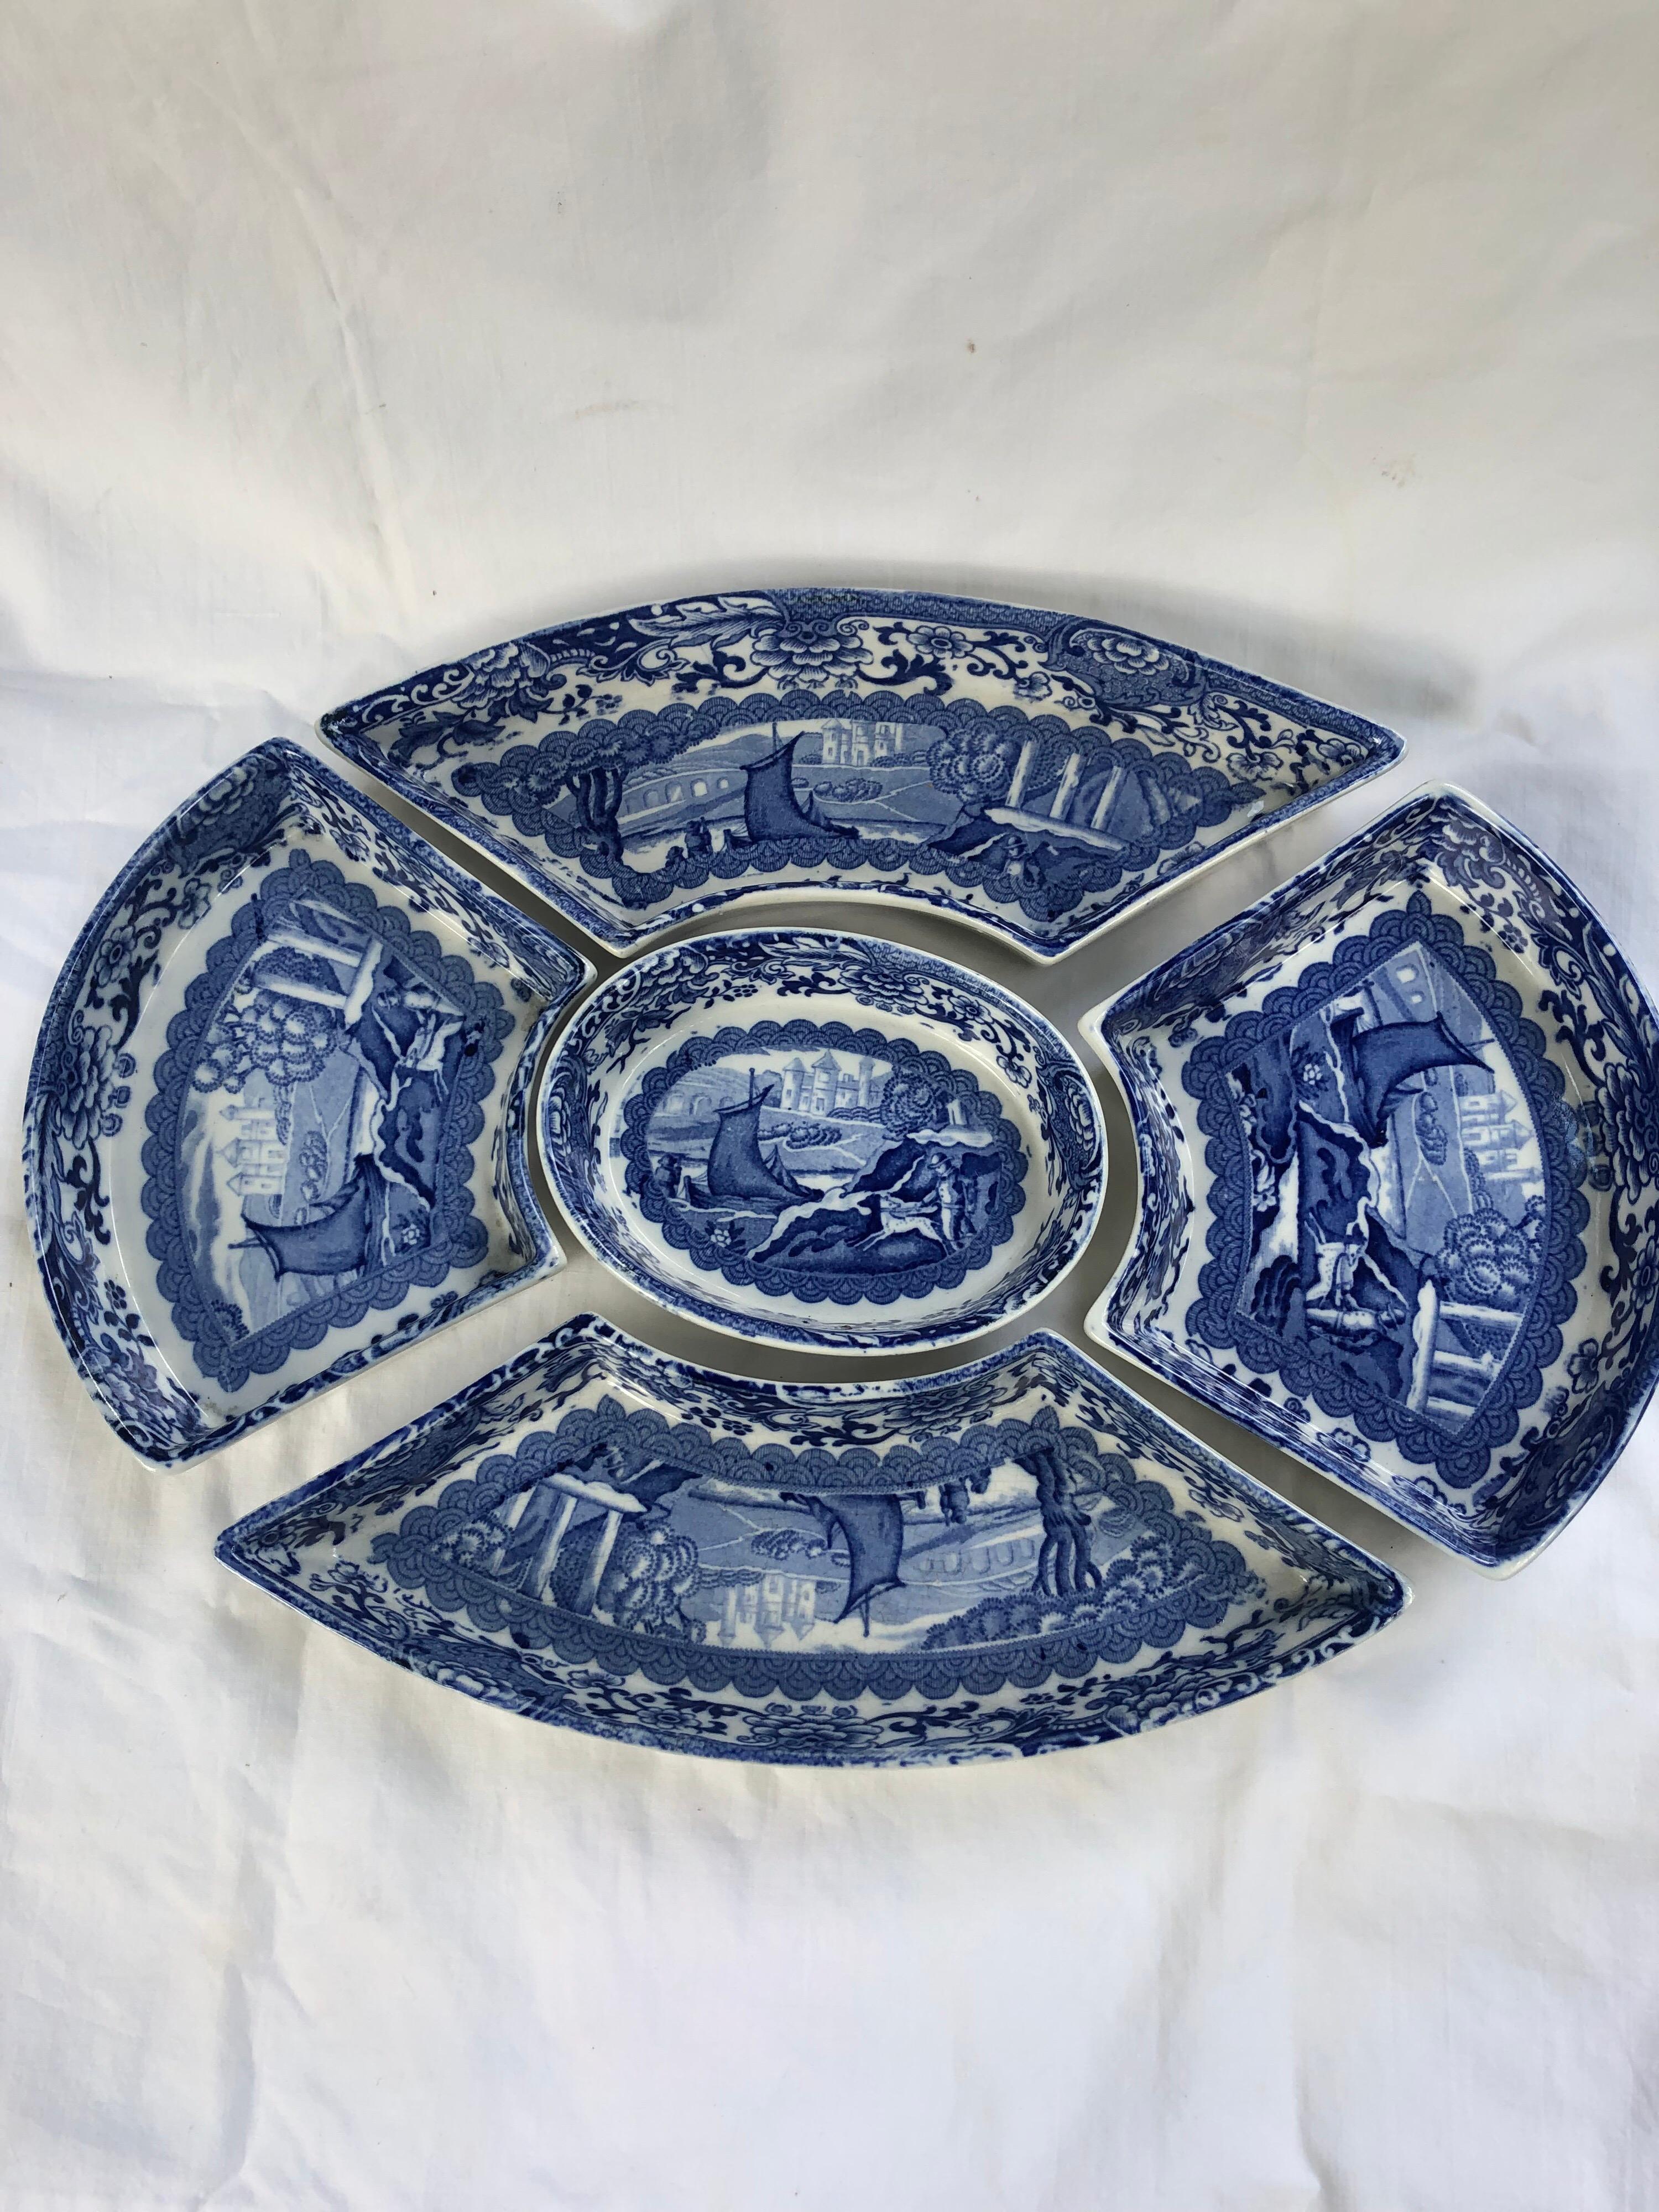 Booths transfer printed porcelain or sweet meats dishes in the old blue Danube pattern.
Comprising five dishes in a stained wood cradle/tray. 12.5